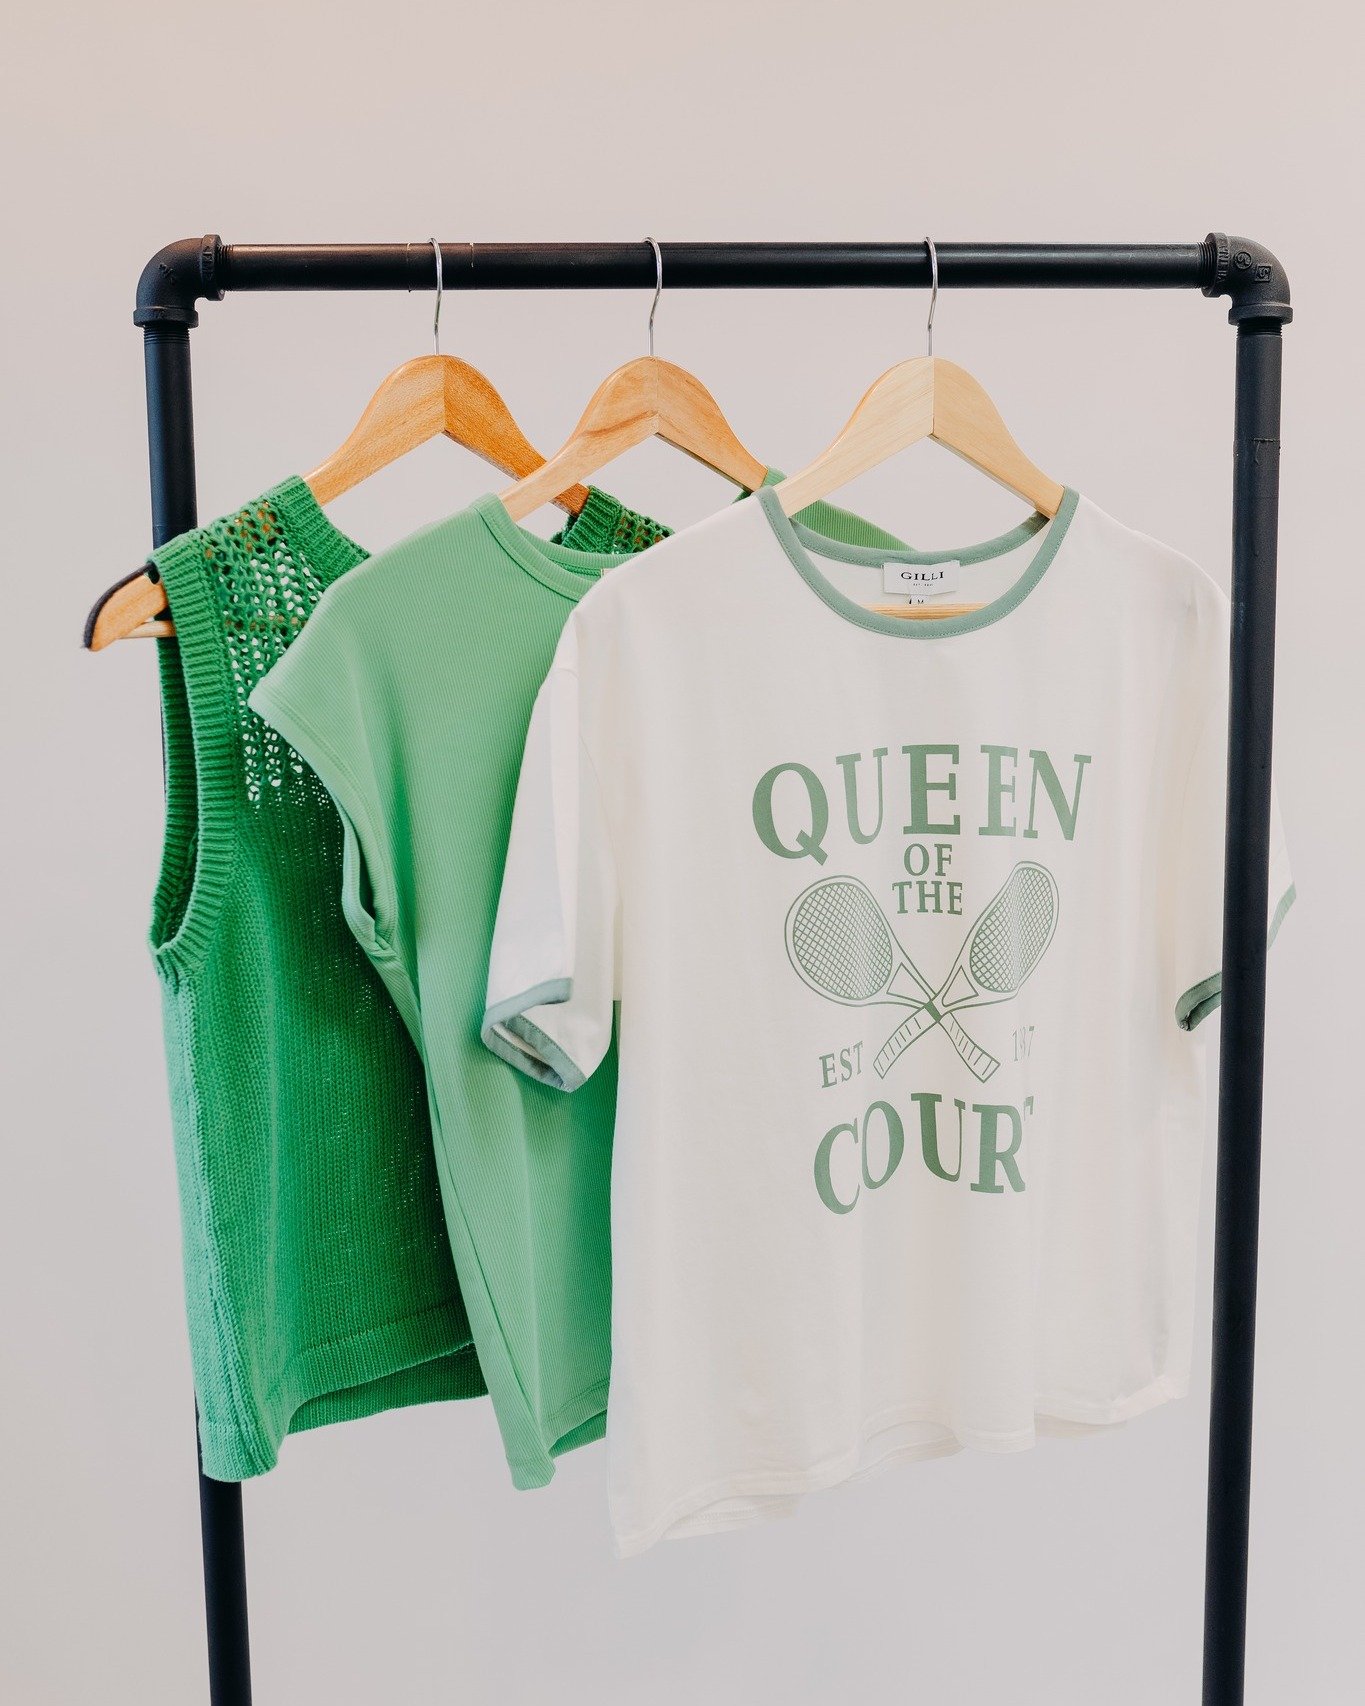 ✨Queen of the Court!✨

Tag a bestie that needs this tee! Our newest arrivals from yesterday are going fast! Stop in this weekend to check them out! 

#mustardseedboutique #eauclaire #eauclaireboutique #downtoearthshops #summerfashion #tennis #pickleb